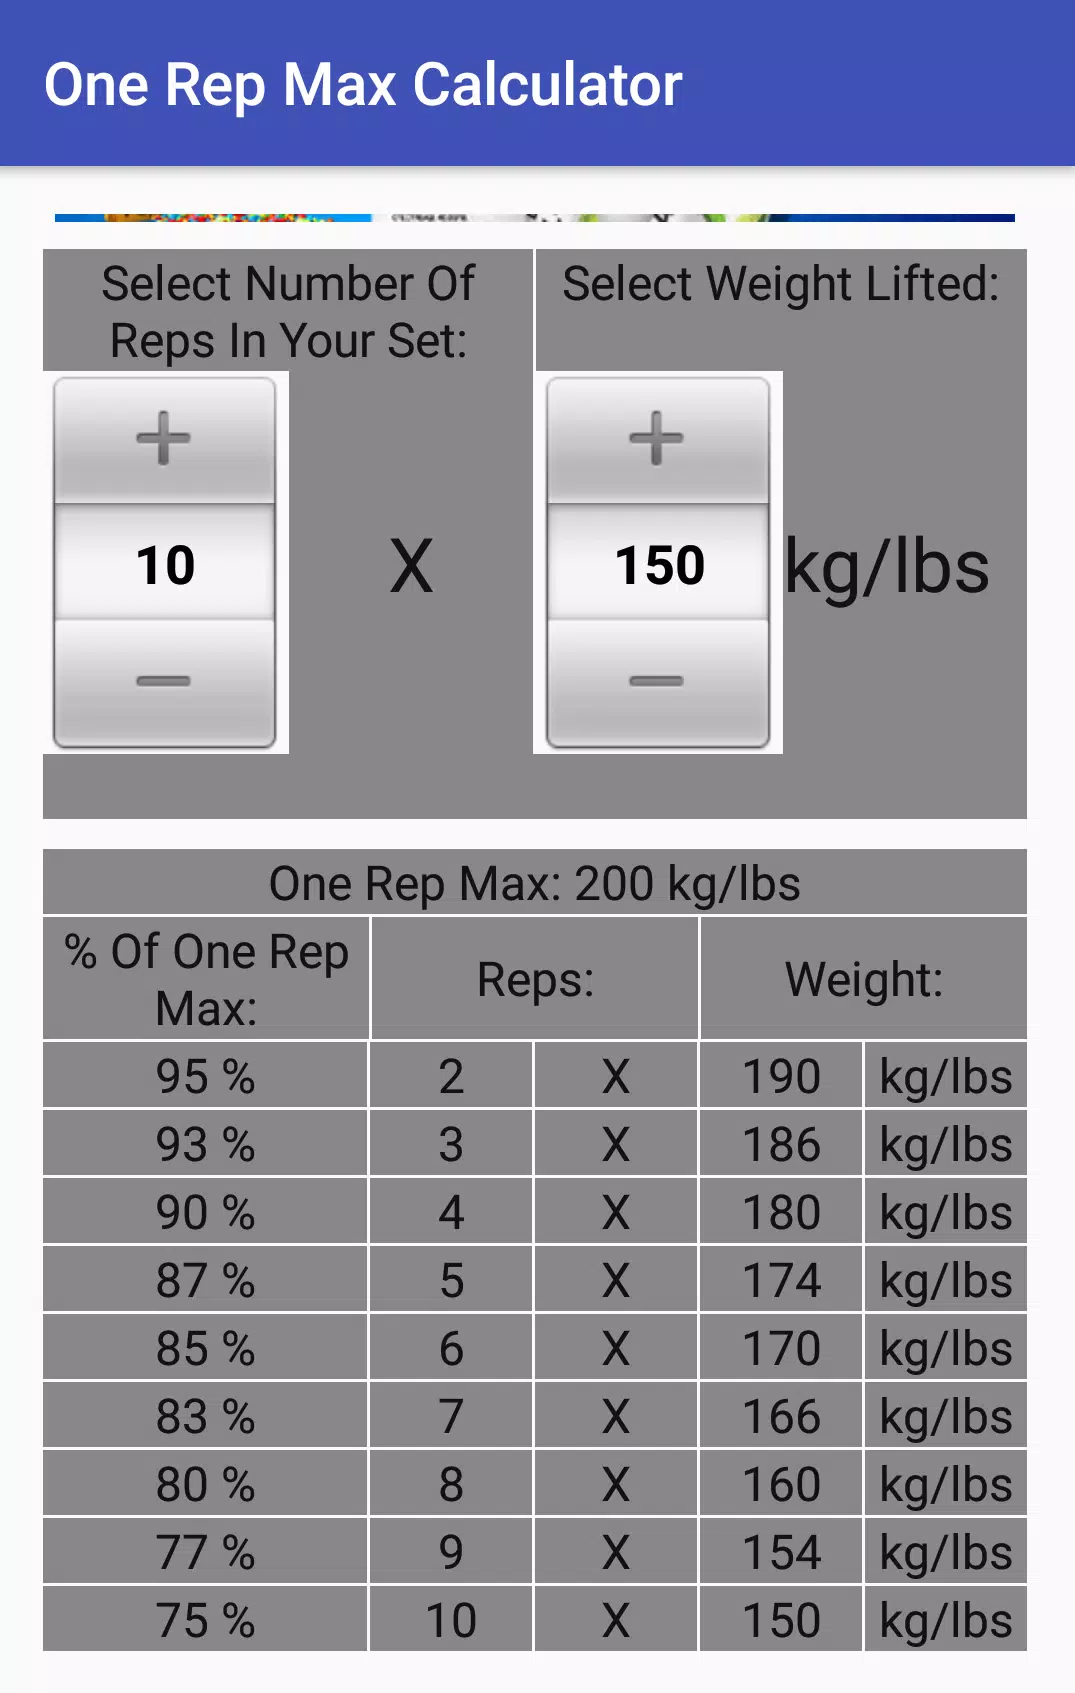 One Rep Max Calculator for Android - APK Download